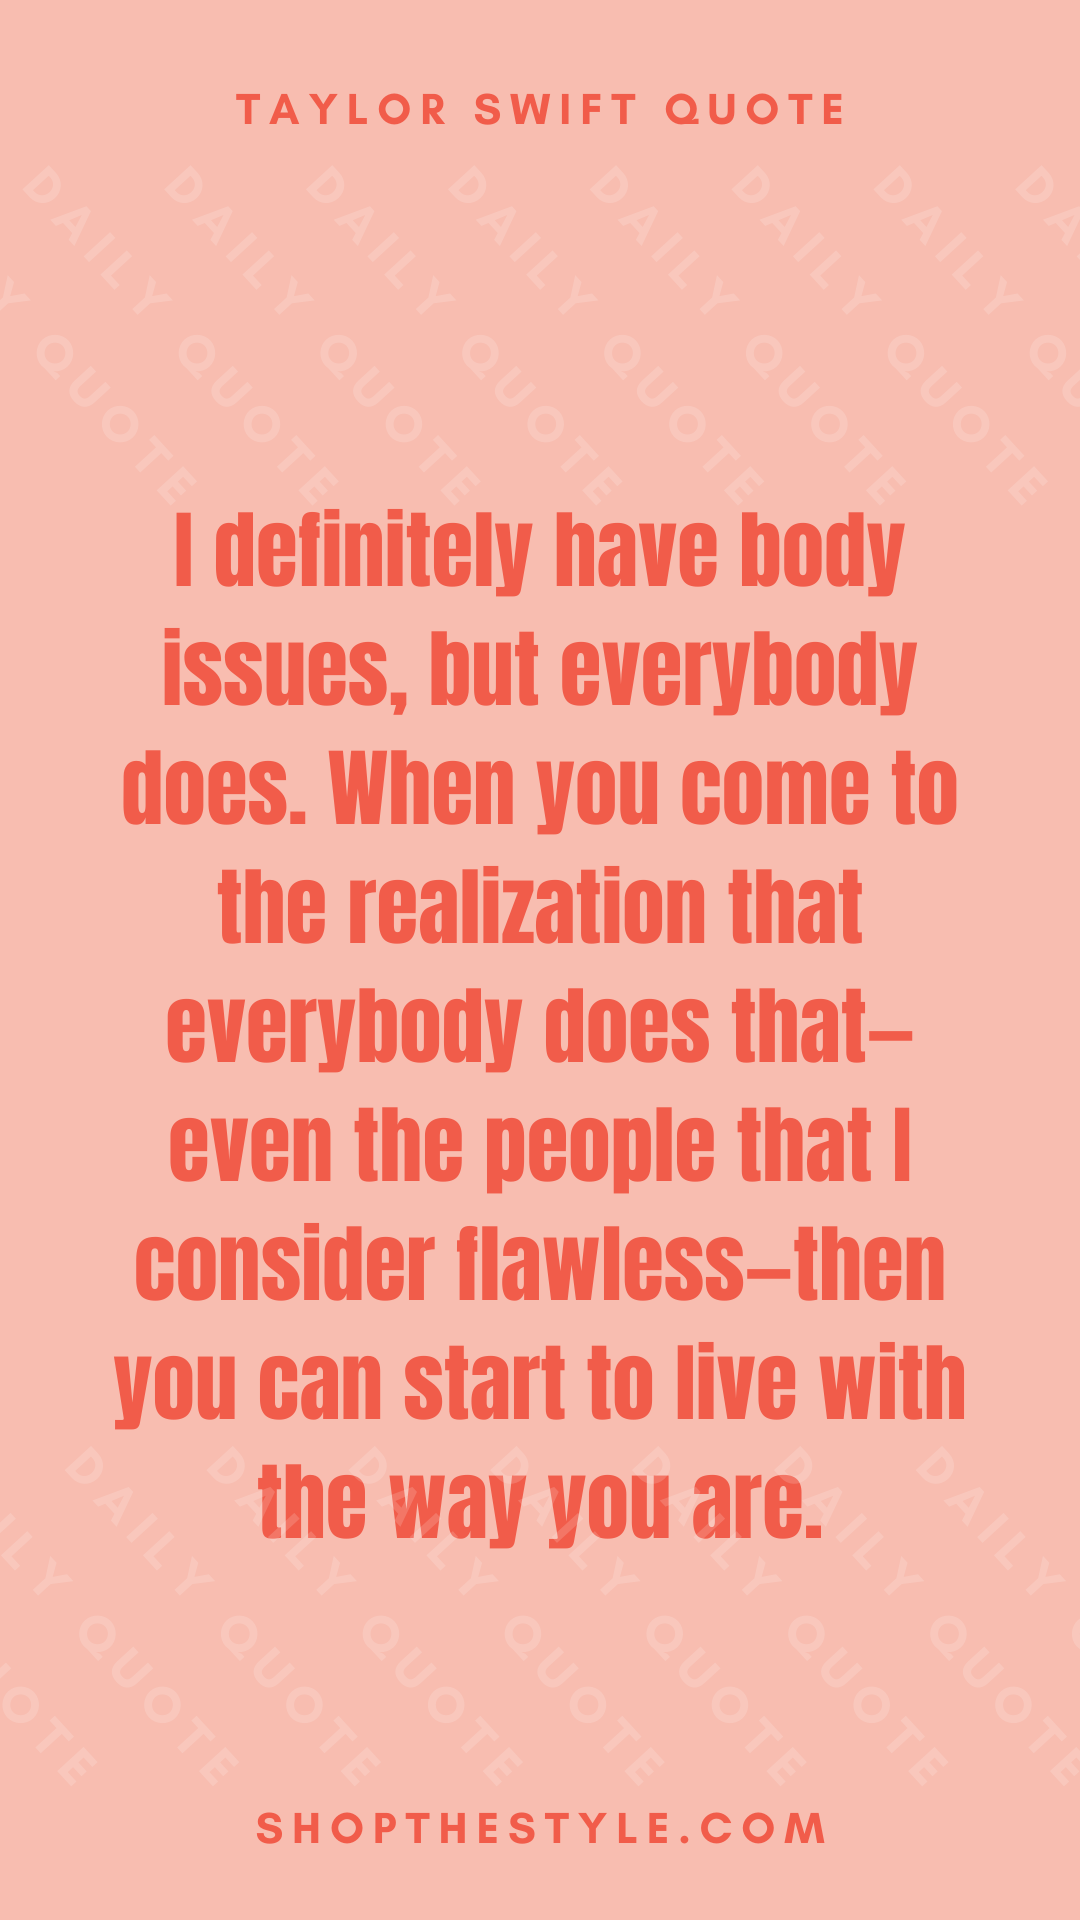 I definitely have body issues, but everybody does. When you come to the realization that everybody does that—even the people that I consider flawless—then you can start to live with the way you are.